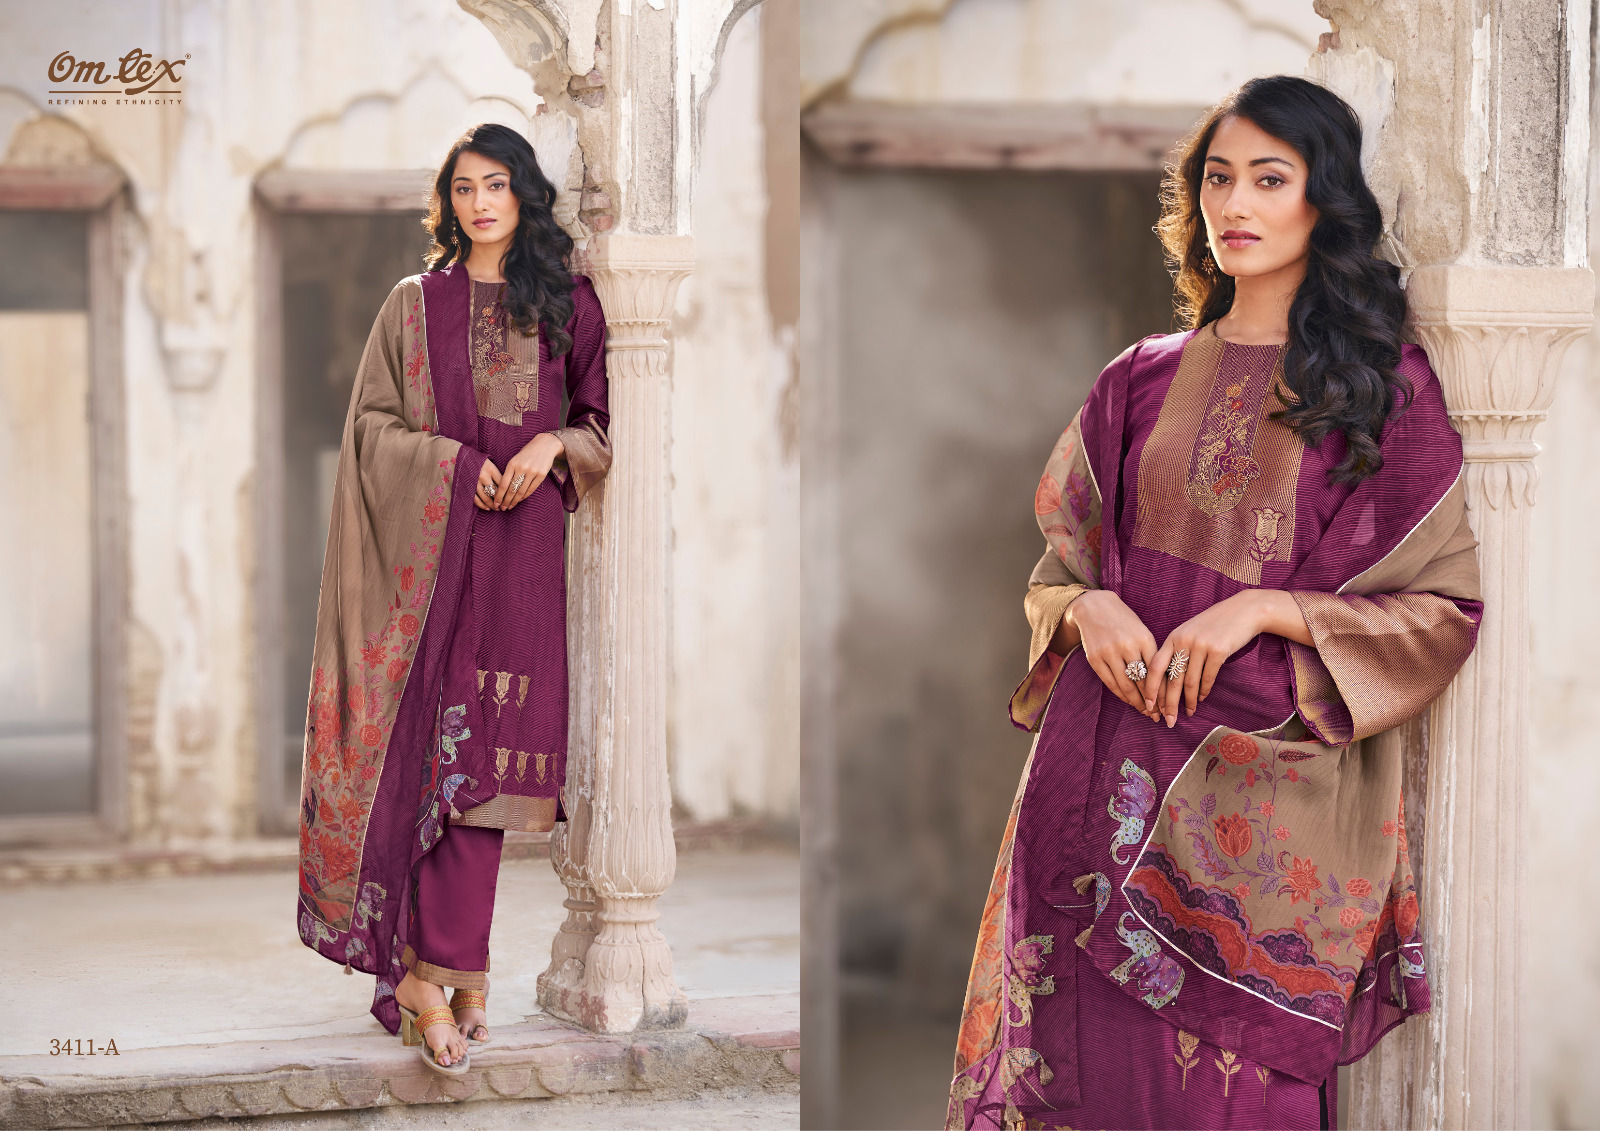 Omtex Aakriti Vol 2 collection 1